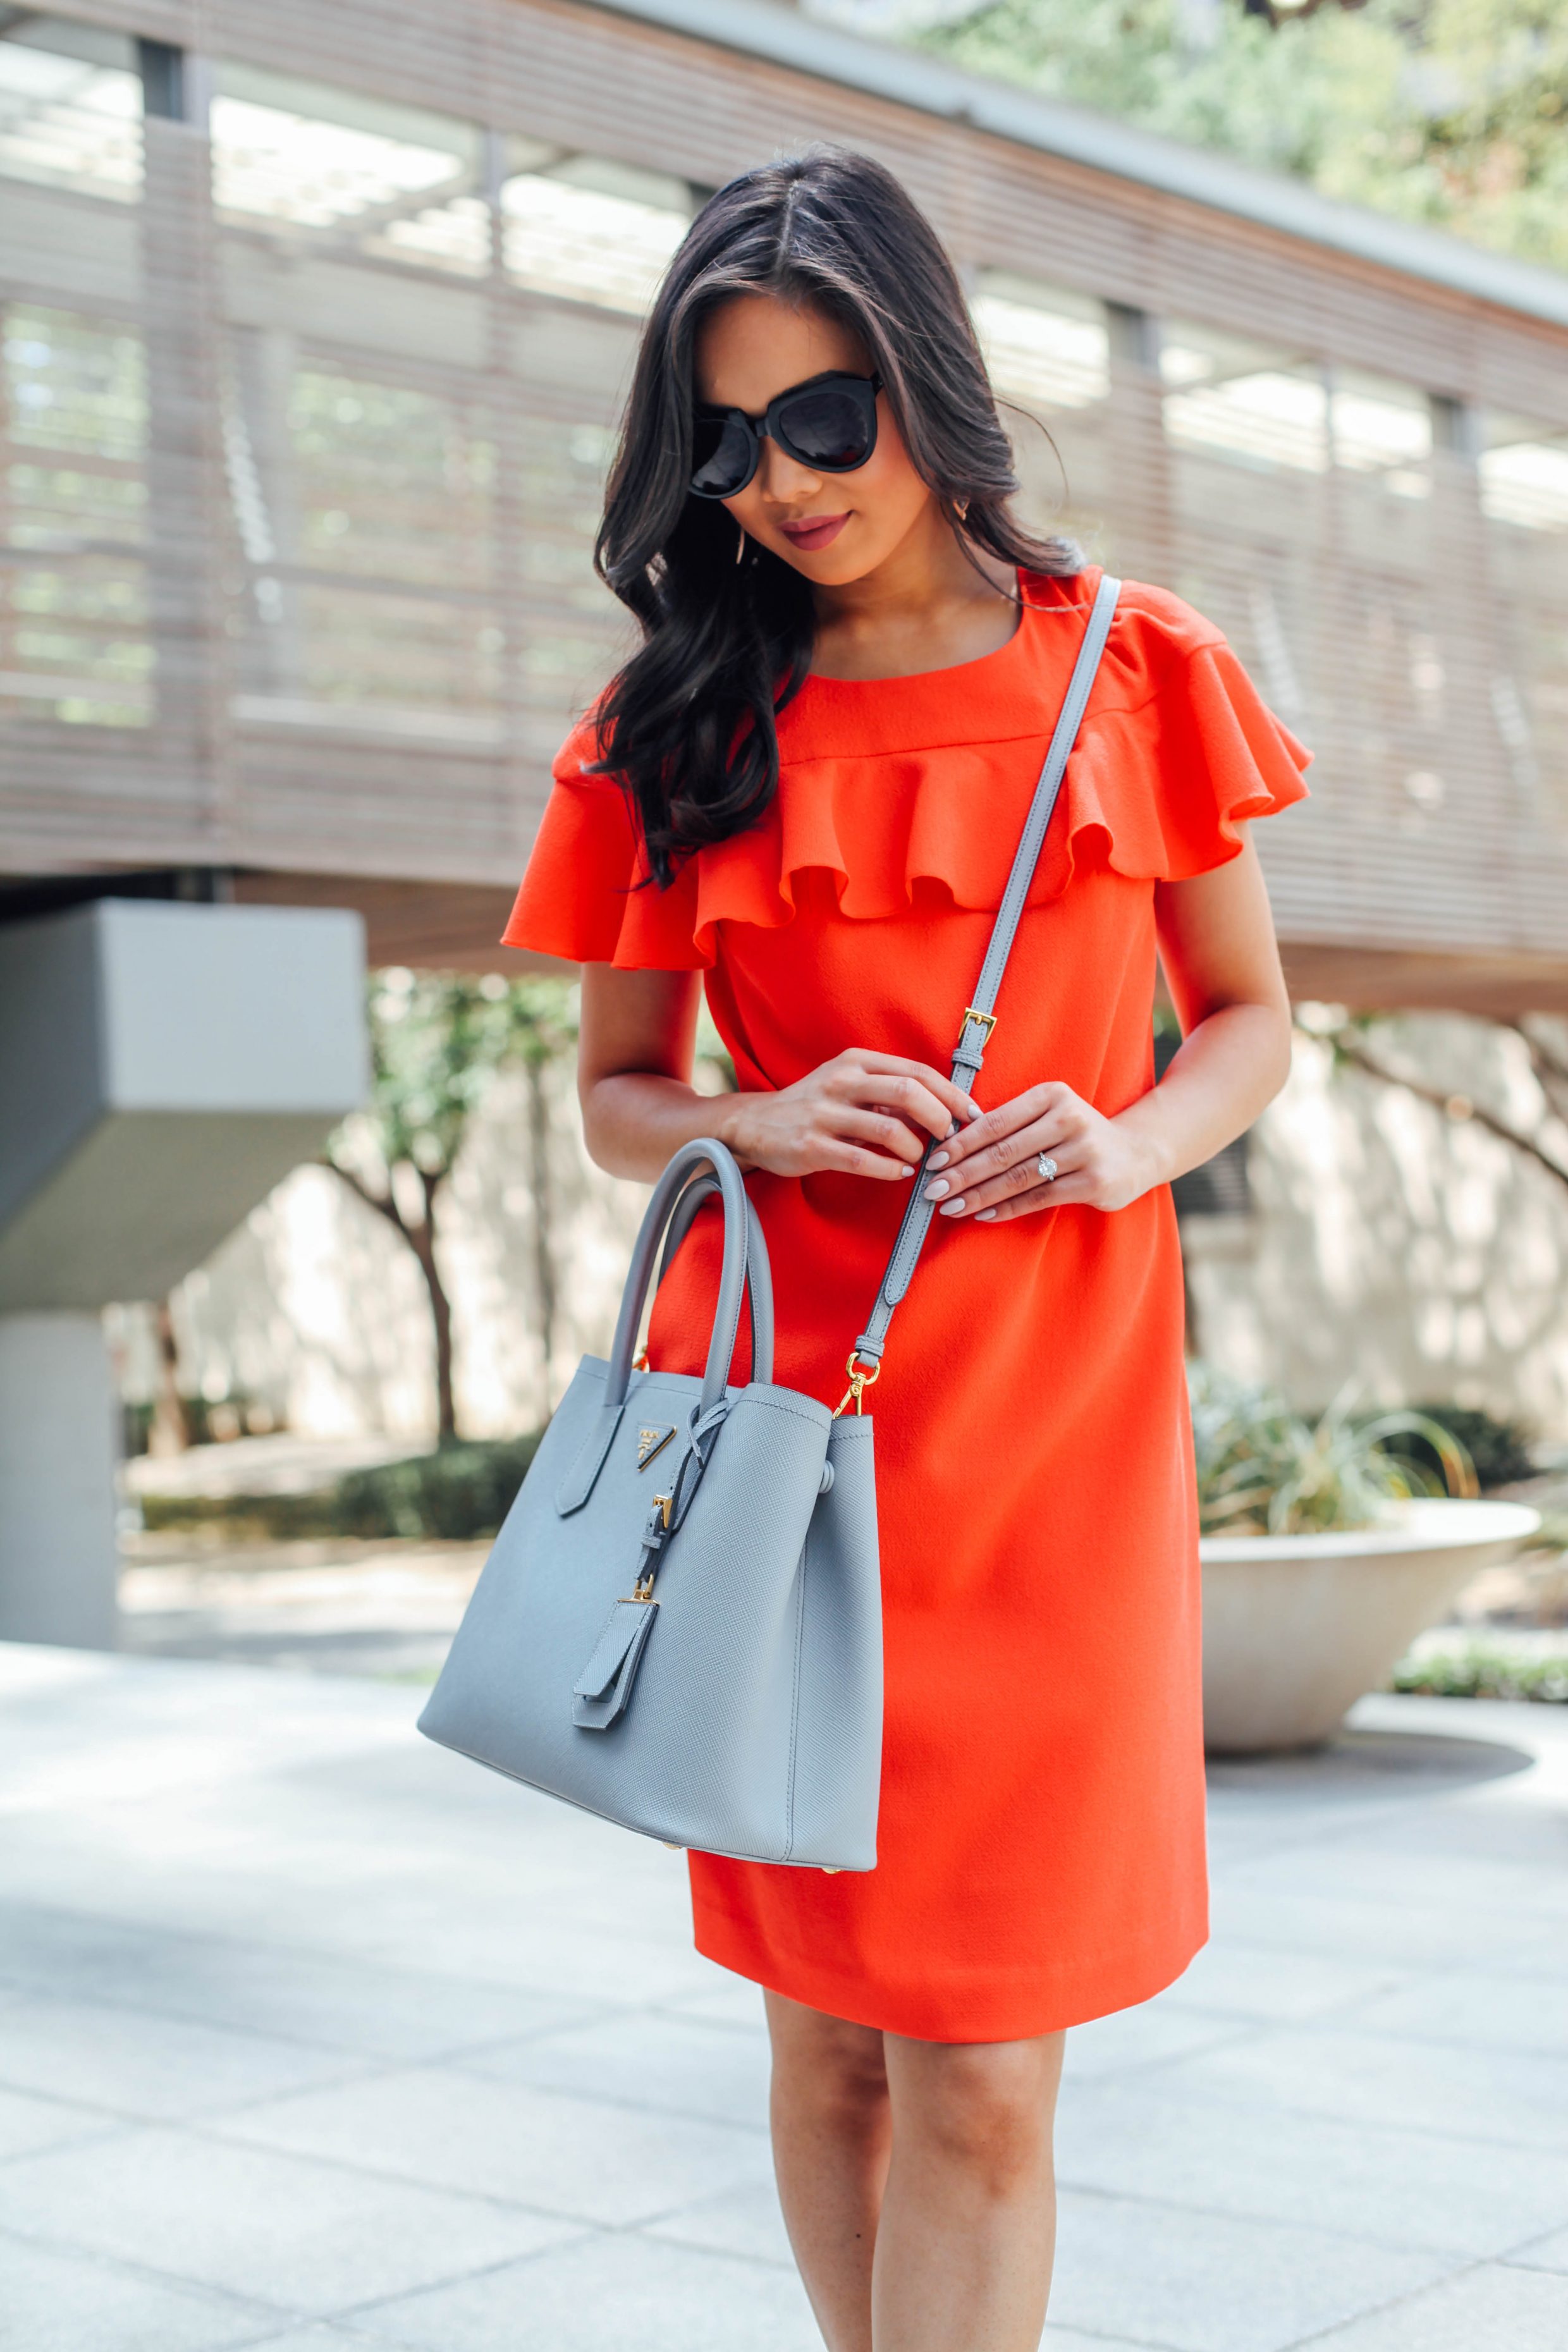 Blogger Hoang-Kim wears a bright orange ruffle dress for spring